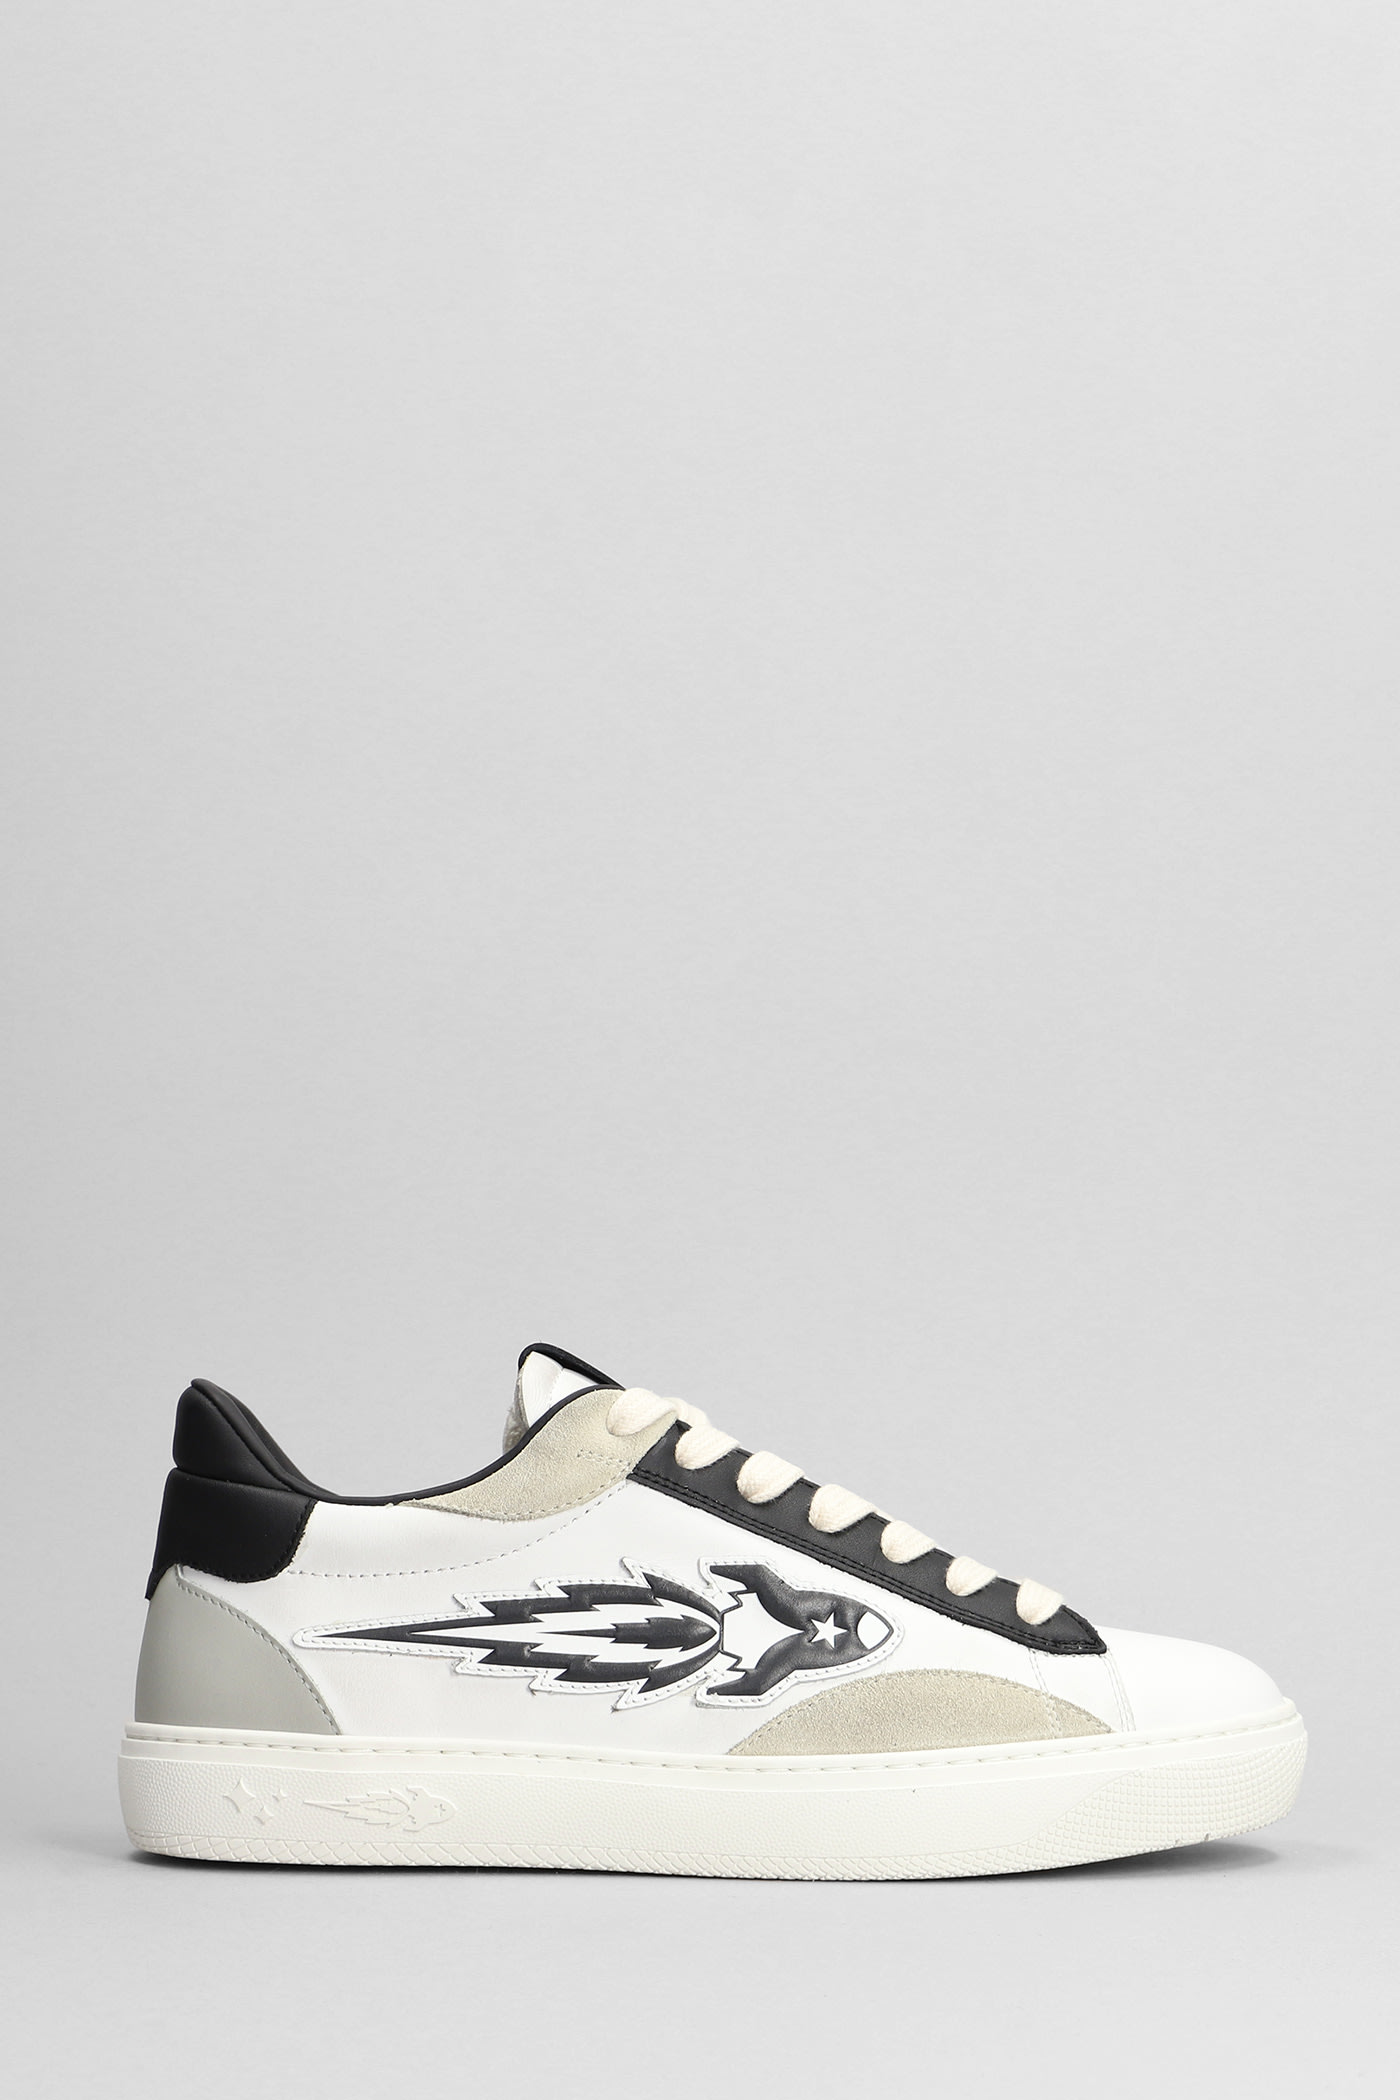 Enterprise Japan Sneakers In White Suede And Leather